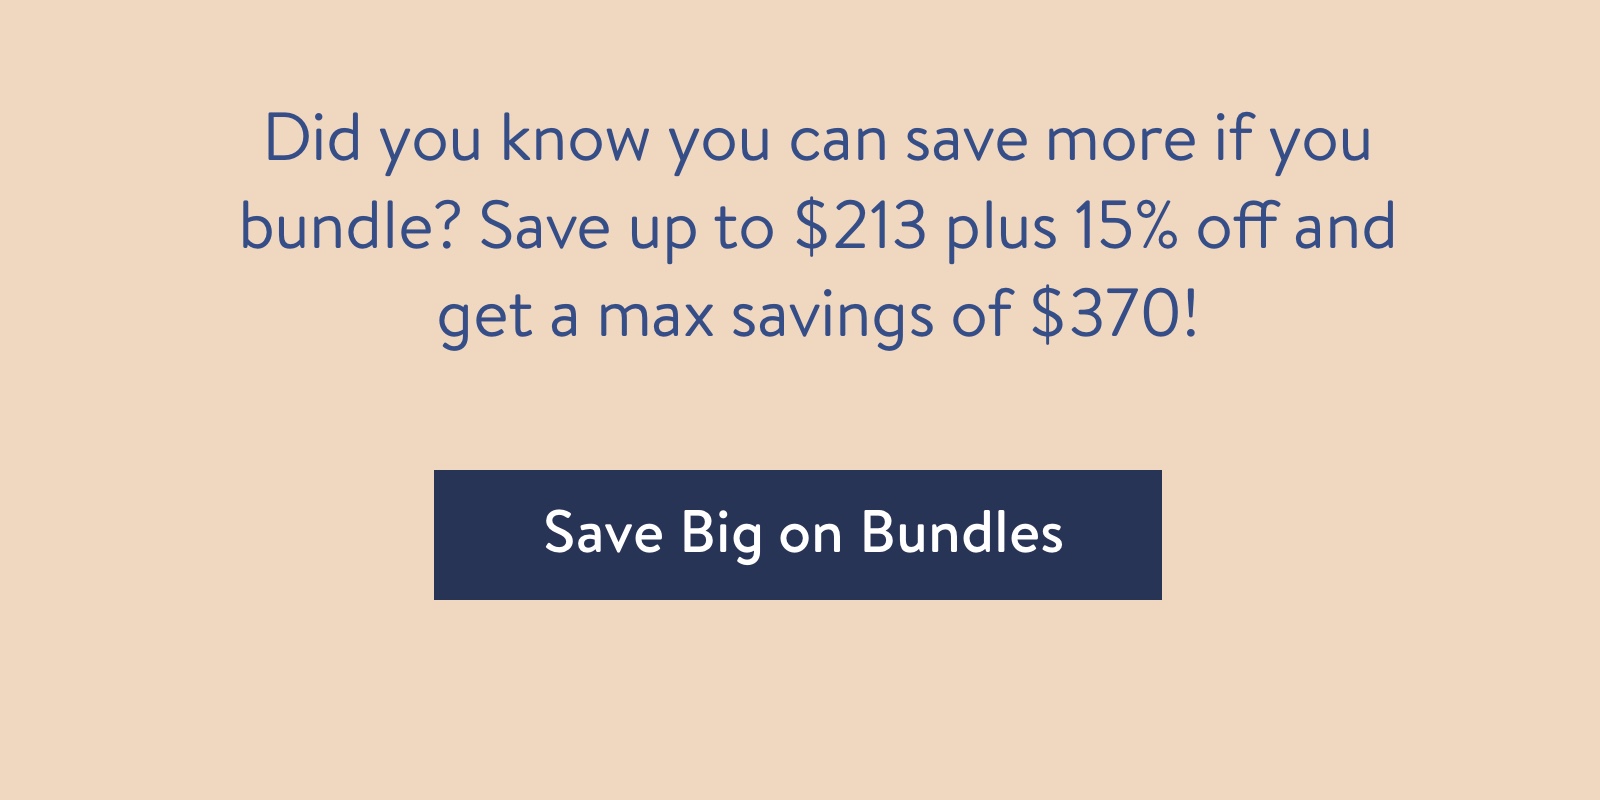 Did you know you can save up to $248 ?if you bundle, and then take an extra? 15% off the top?